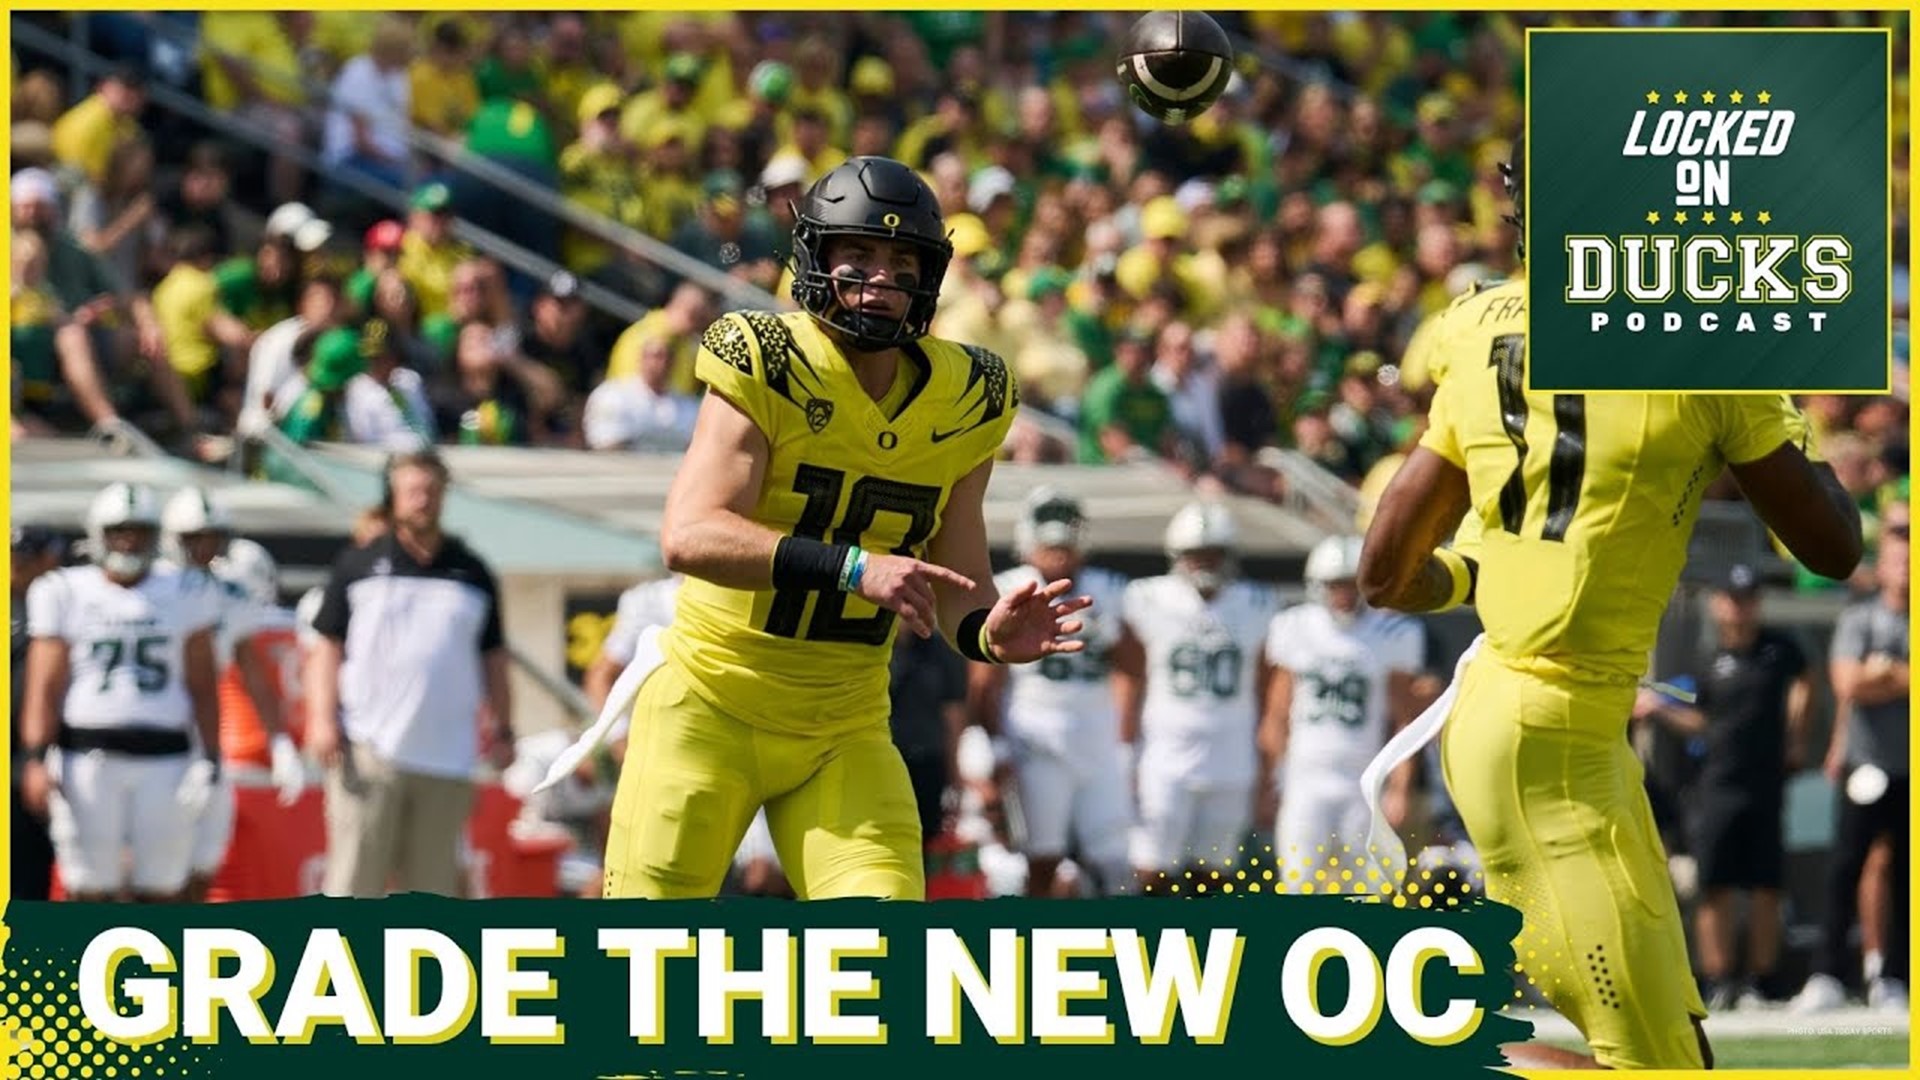 Oregon has gotten through the first 2 weeks of the 2023 season unscathed after their thrilling win against Texas Tech.